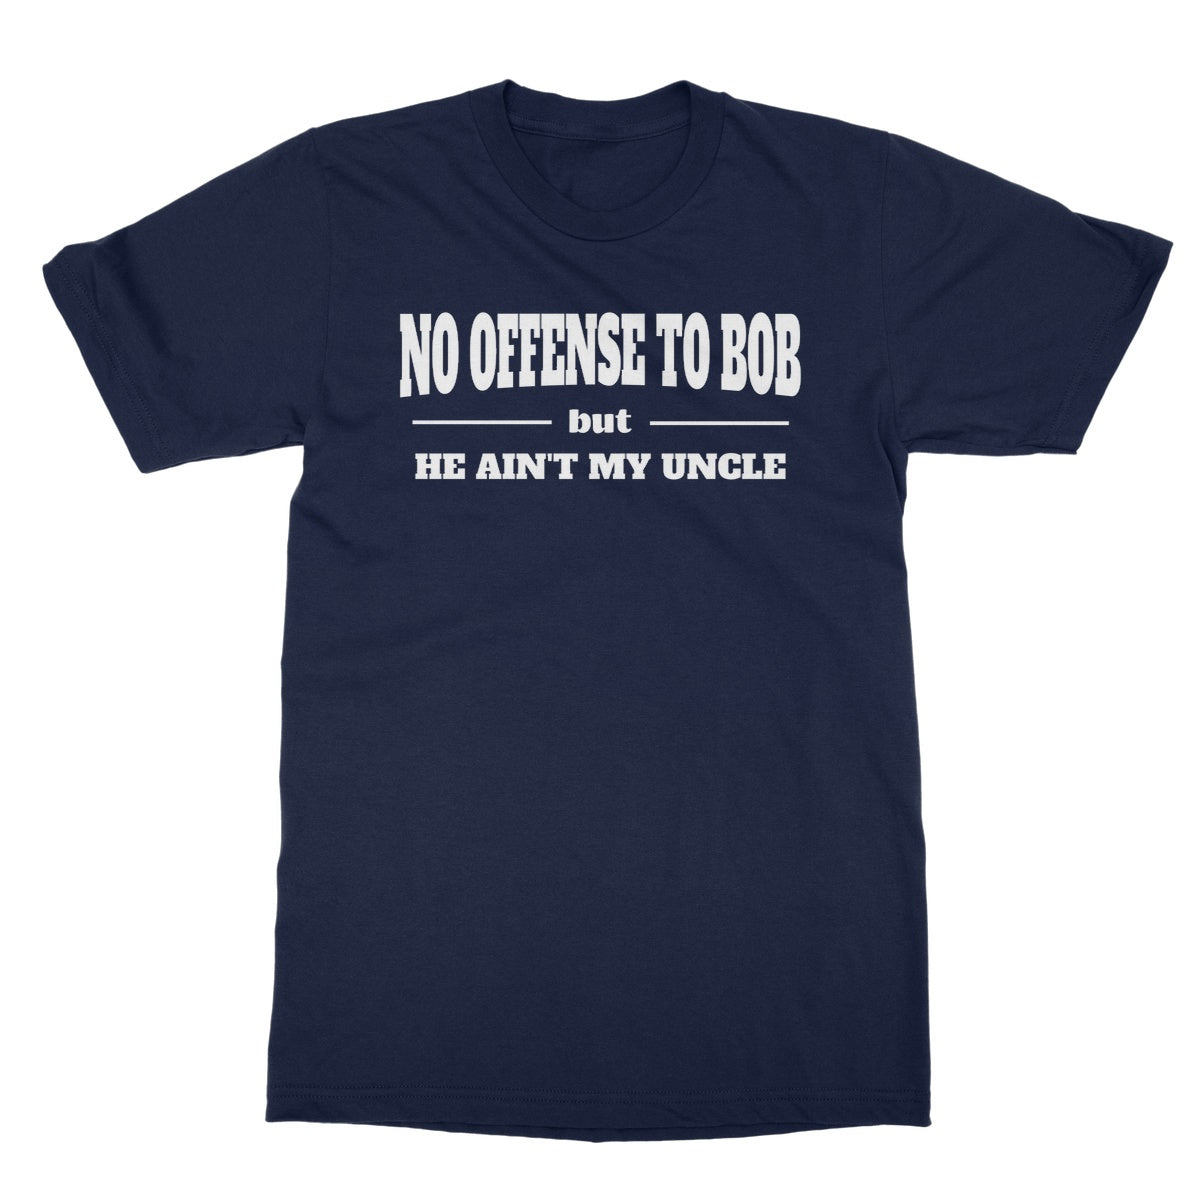 bob is not my uncle t shirt navy